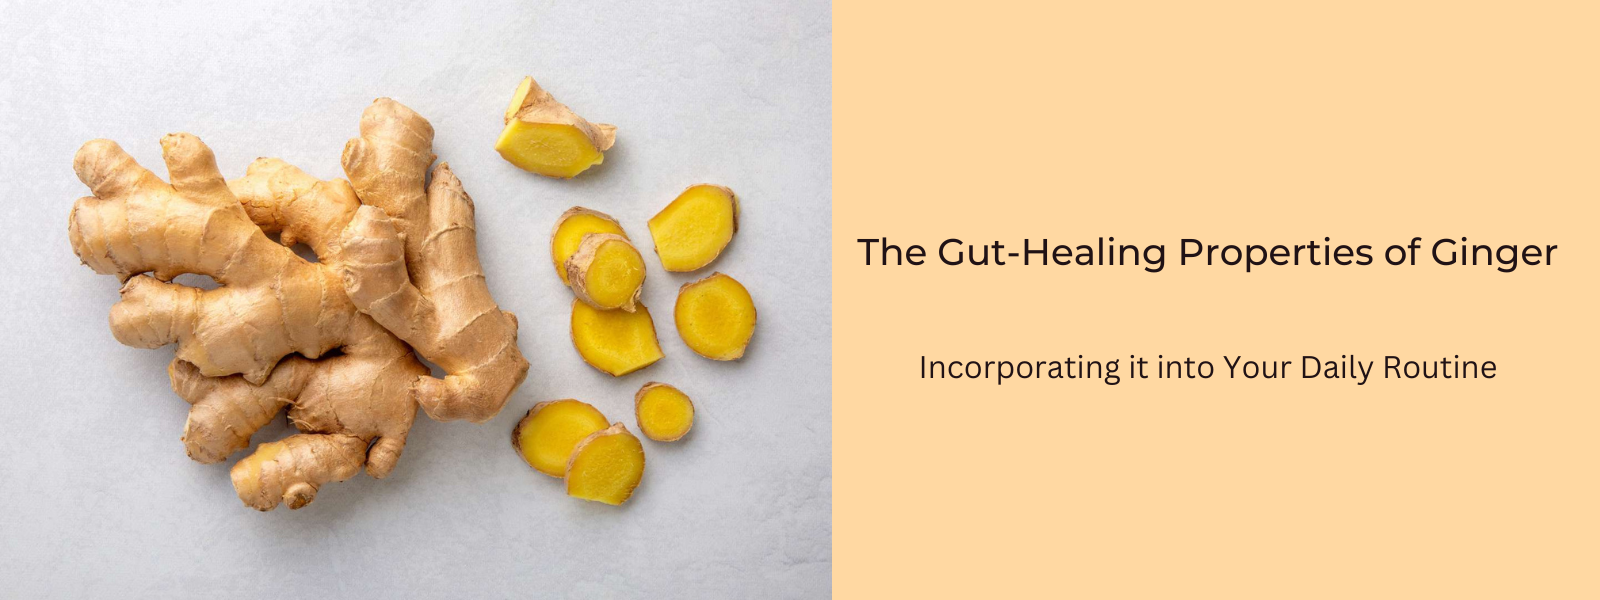 The Gut-Healing Properties of Ginger: Incorporating it into Your Daily Routine